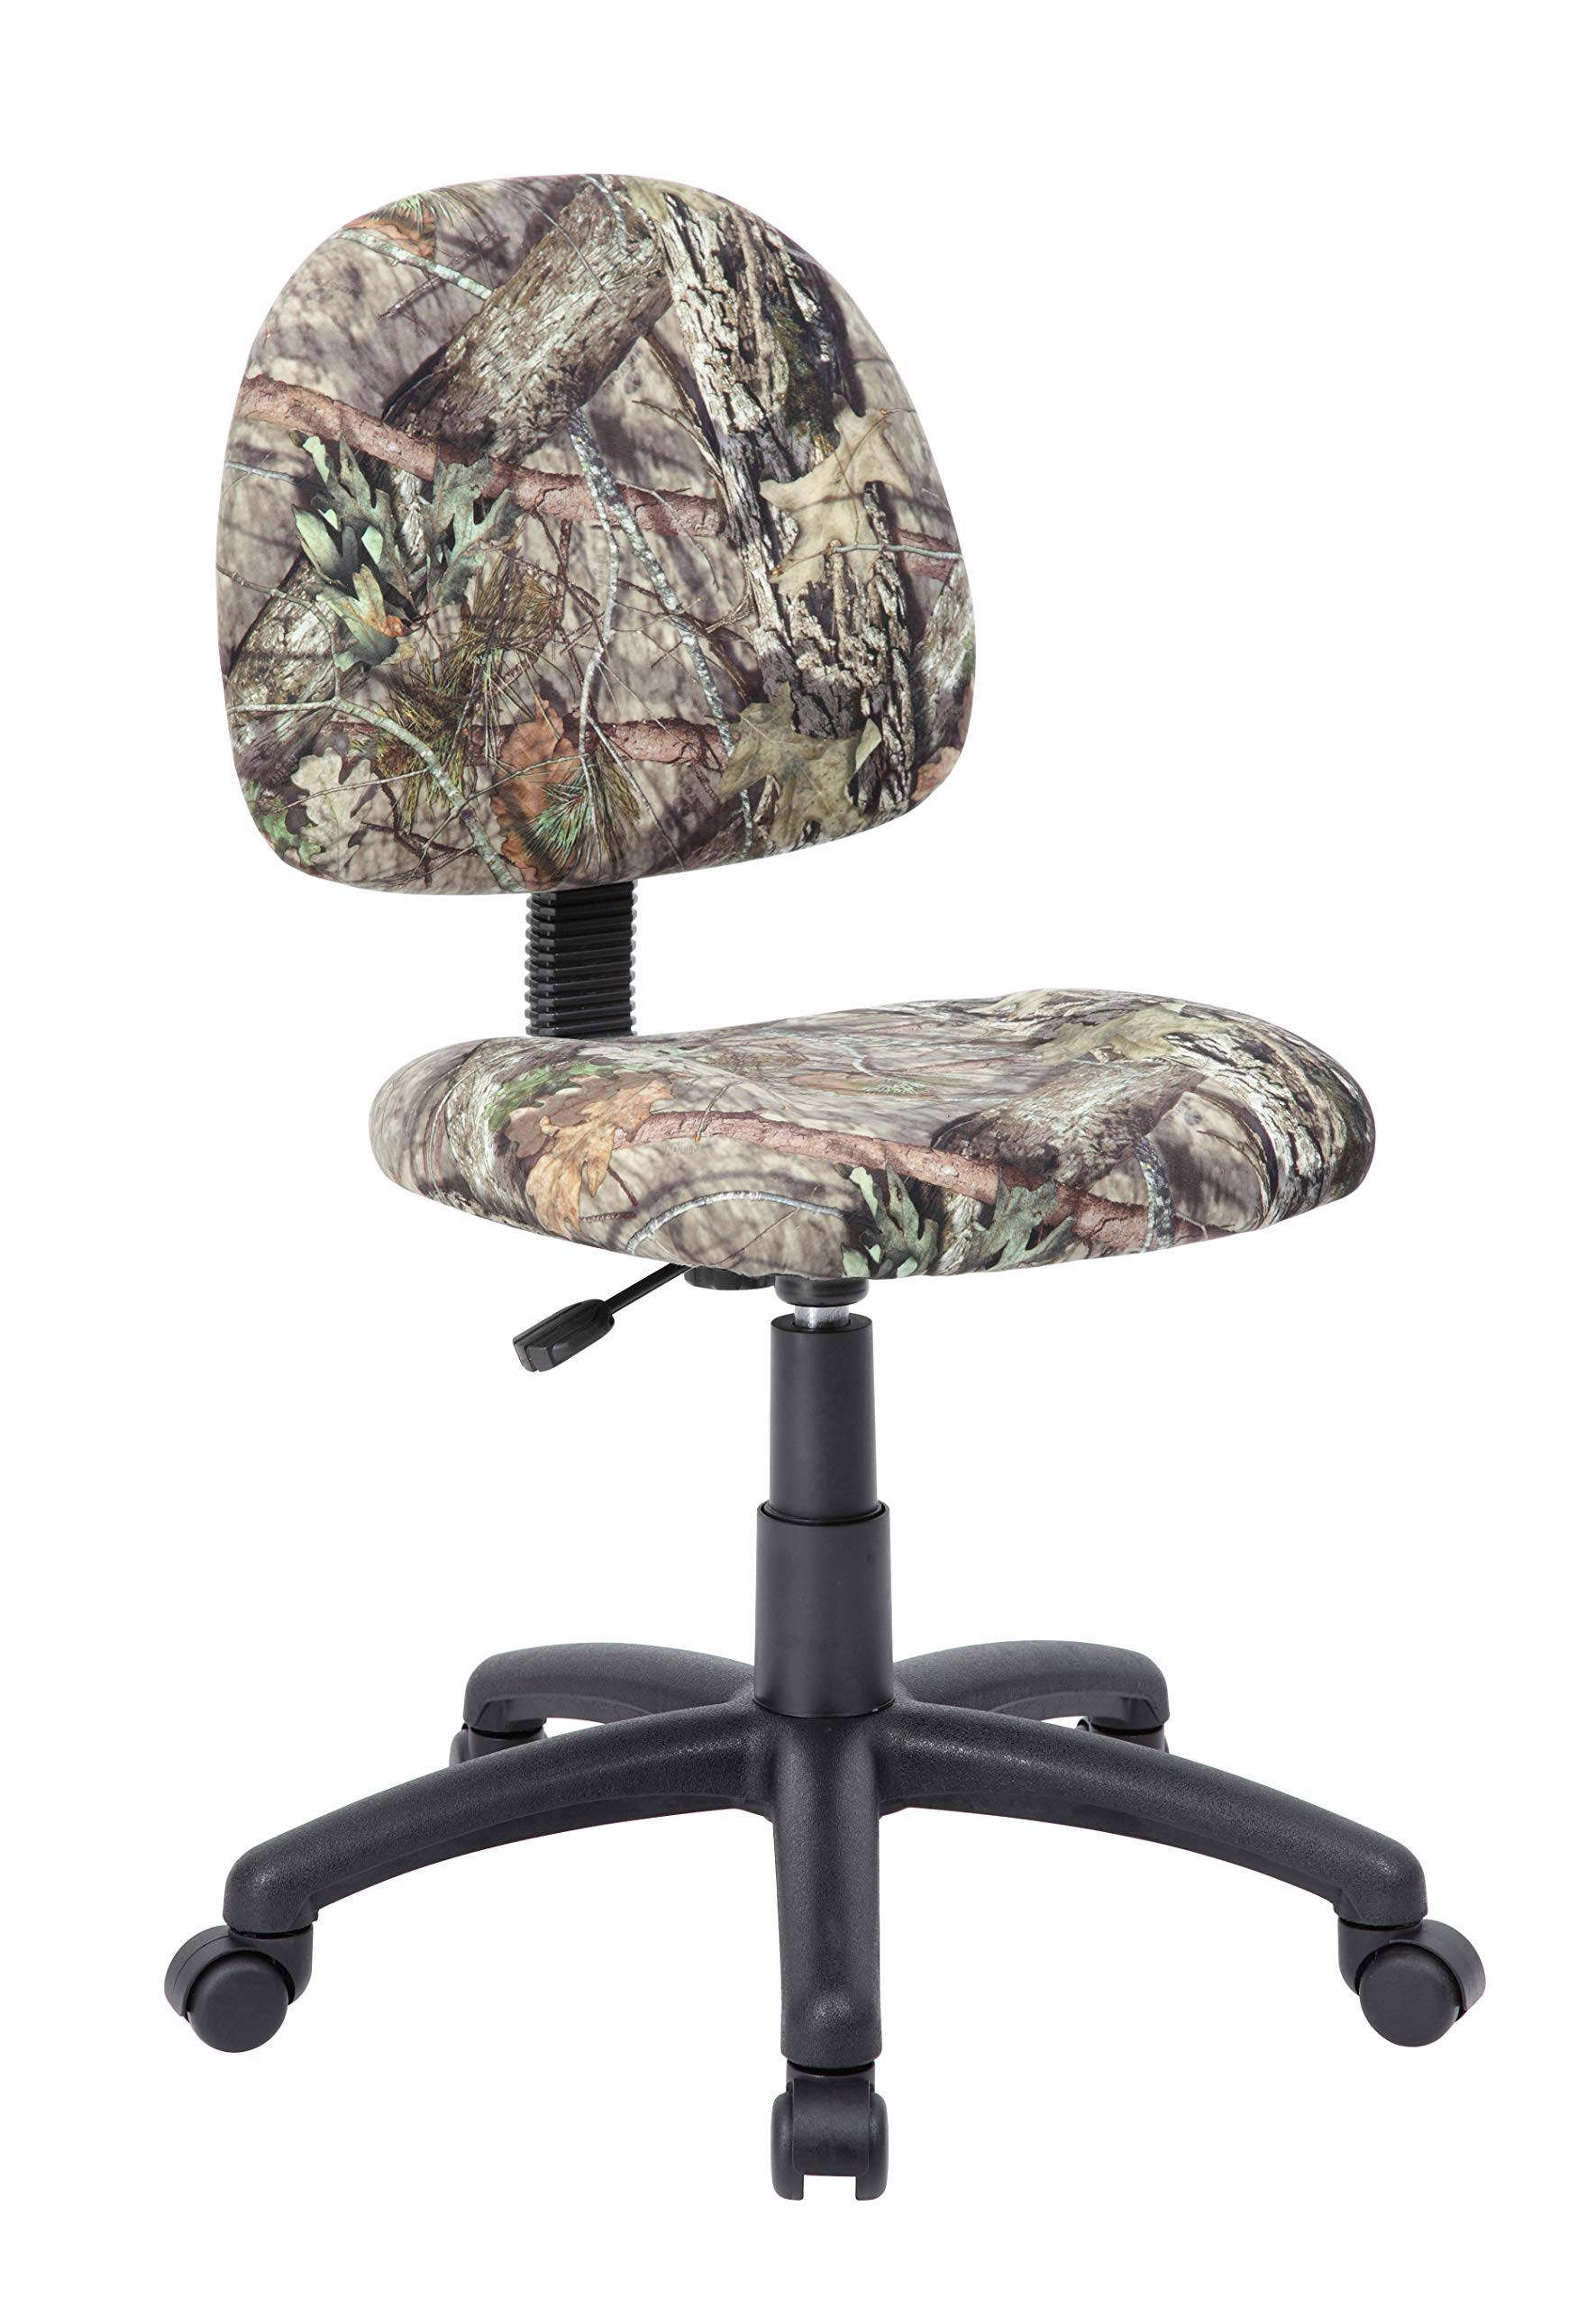 Boss Deluxe Posture Chair - Mossy Oak - Cirtcod